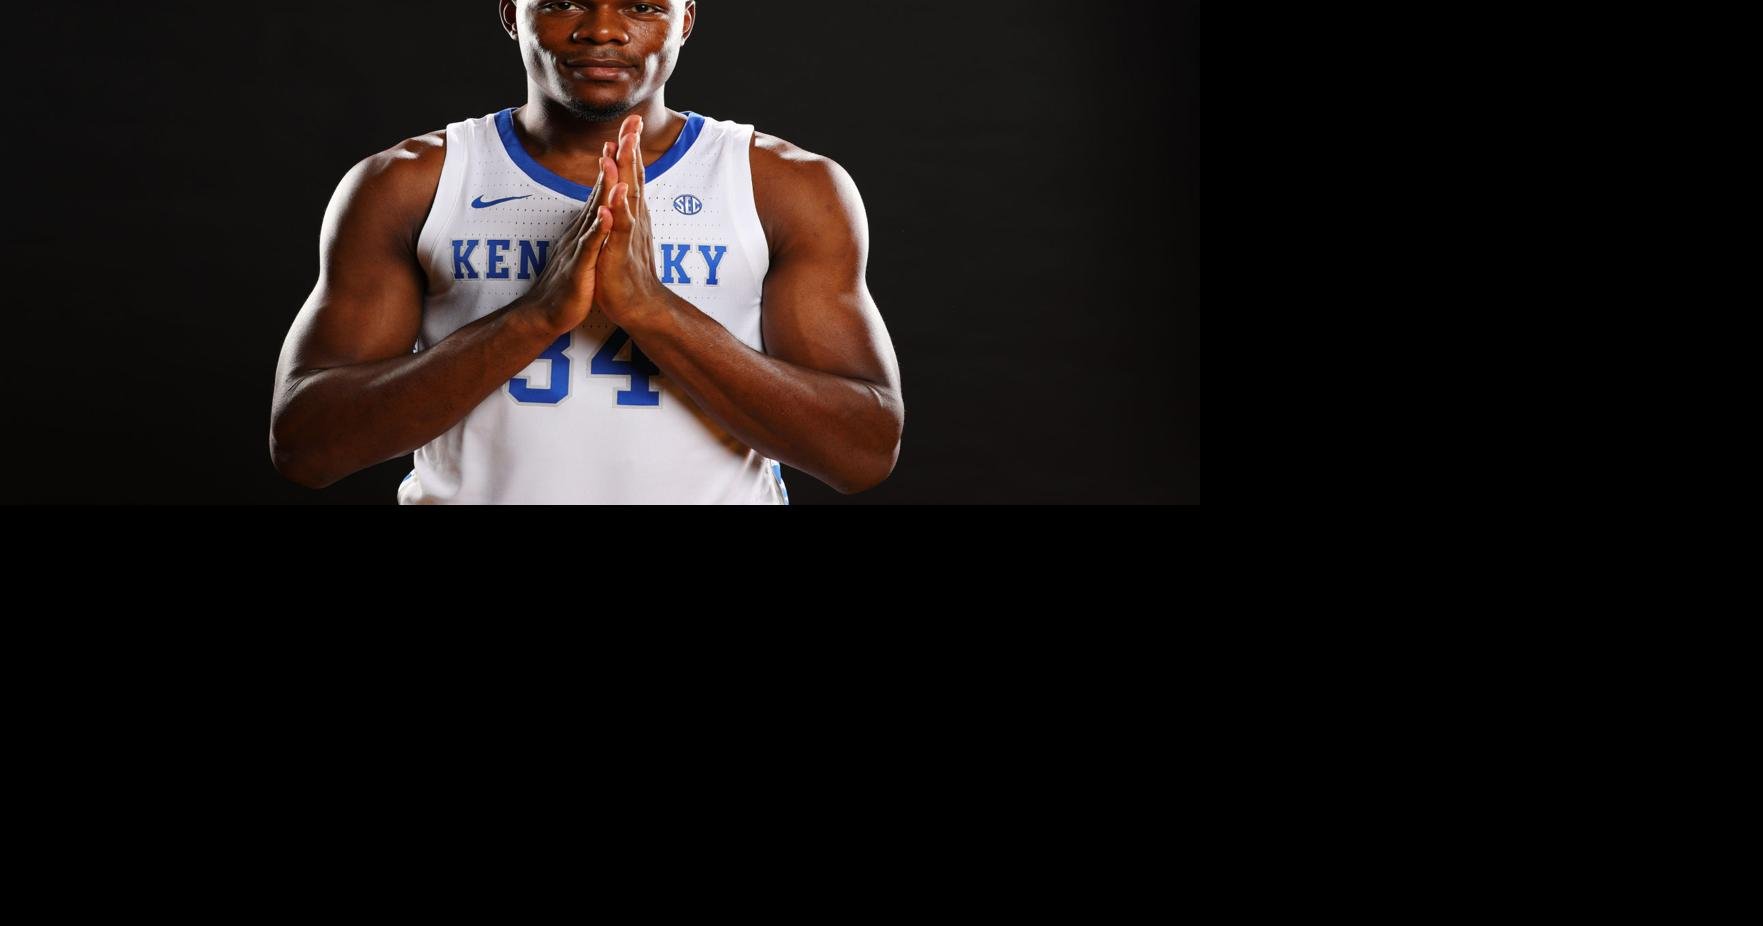 Letters from home: A mother's message to Kentucky's Immanuel Quickley - The  Athletic